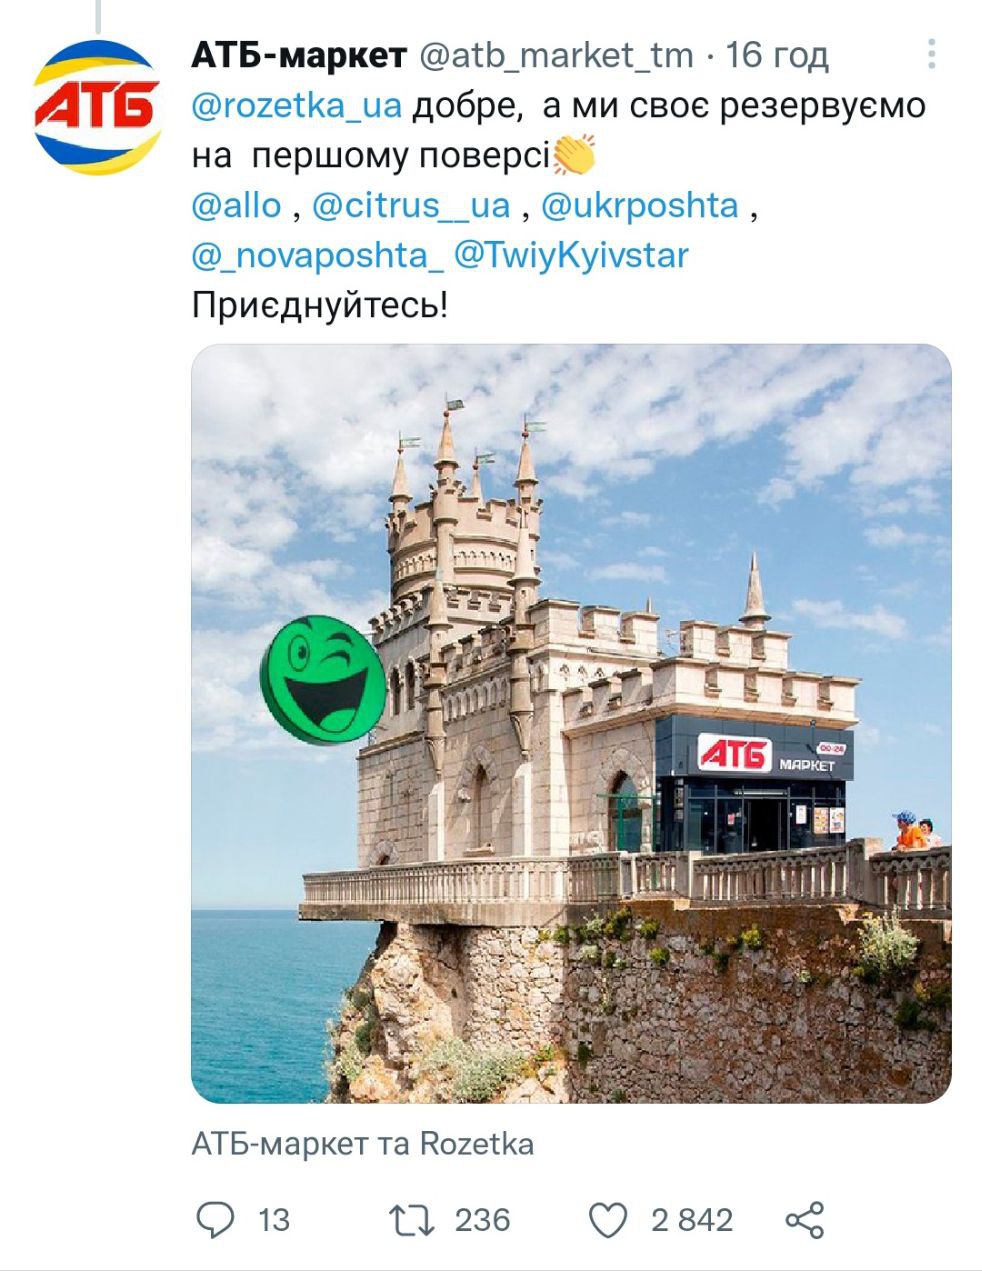 Ukrainian brands and bloggers joke about the return of Crimea - a selection of tweets